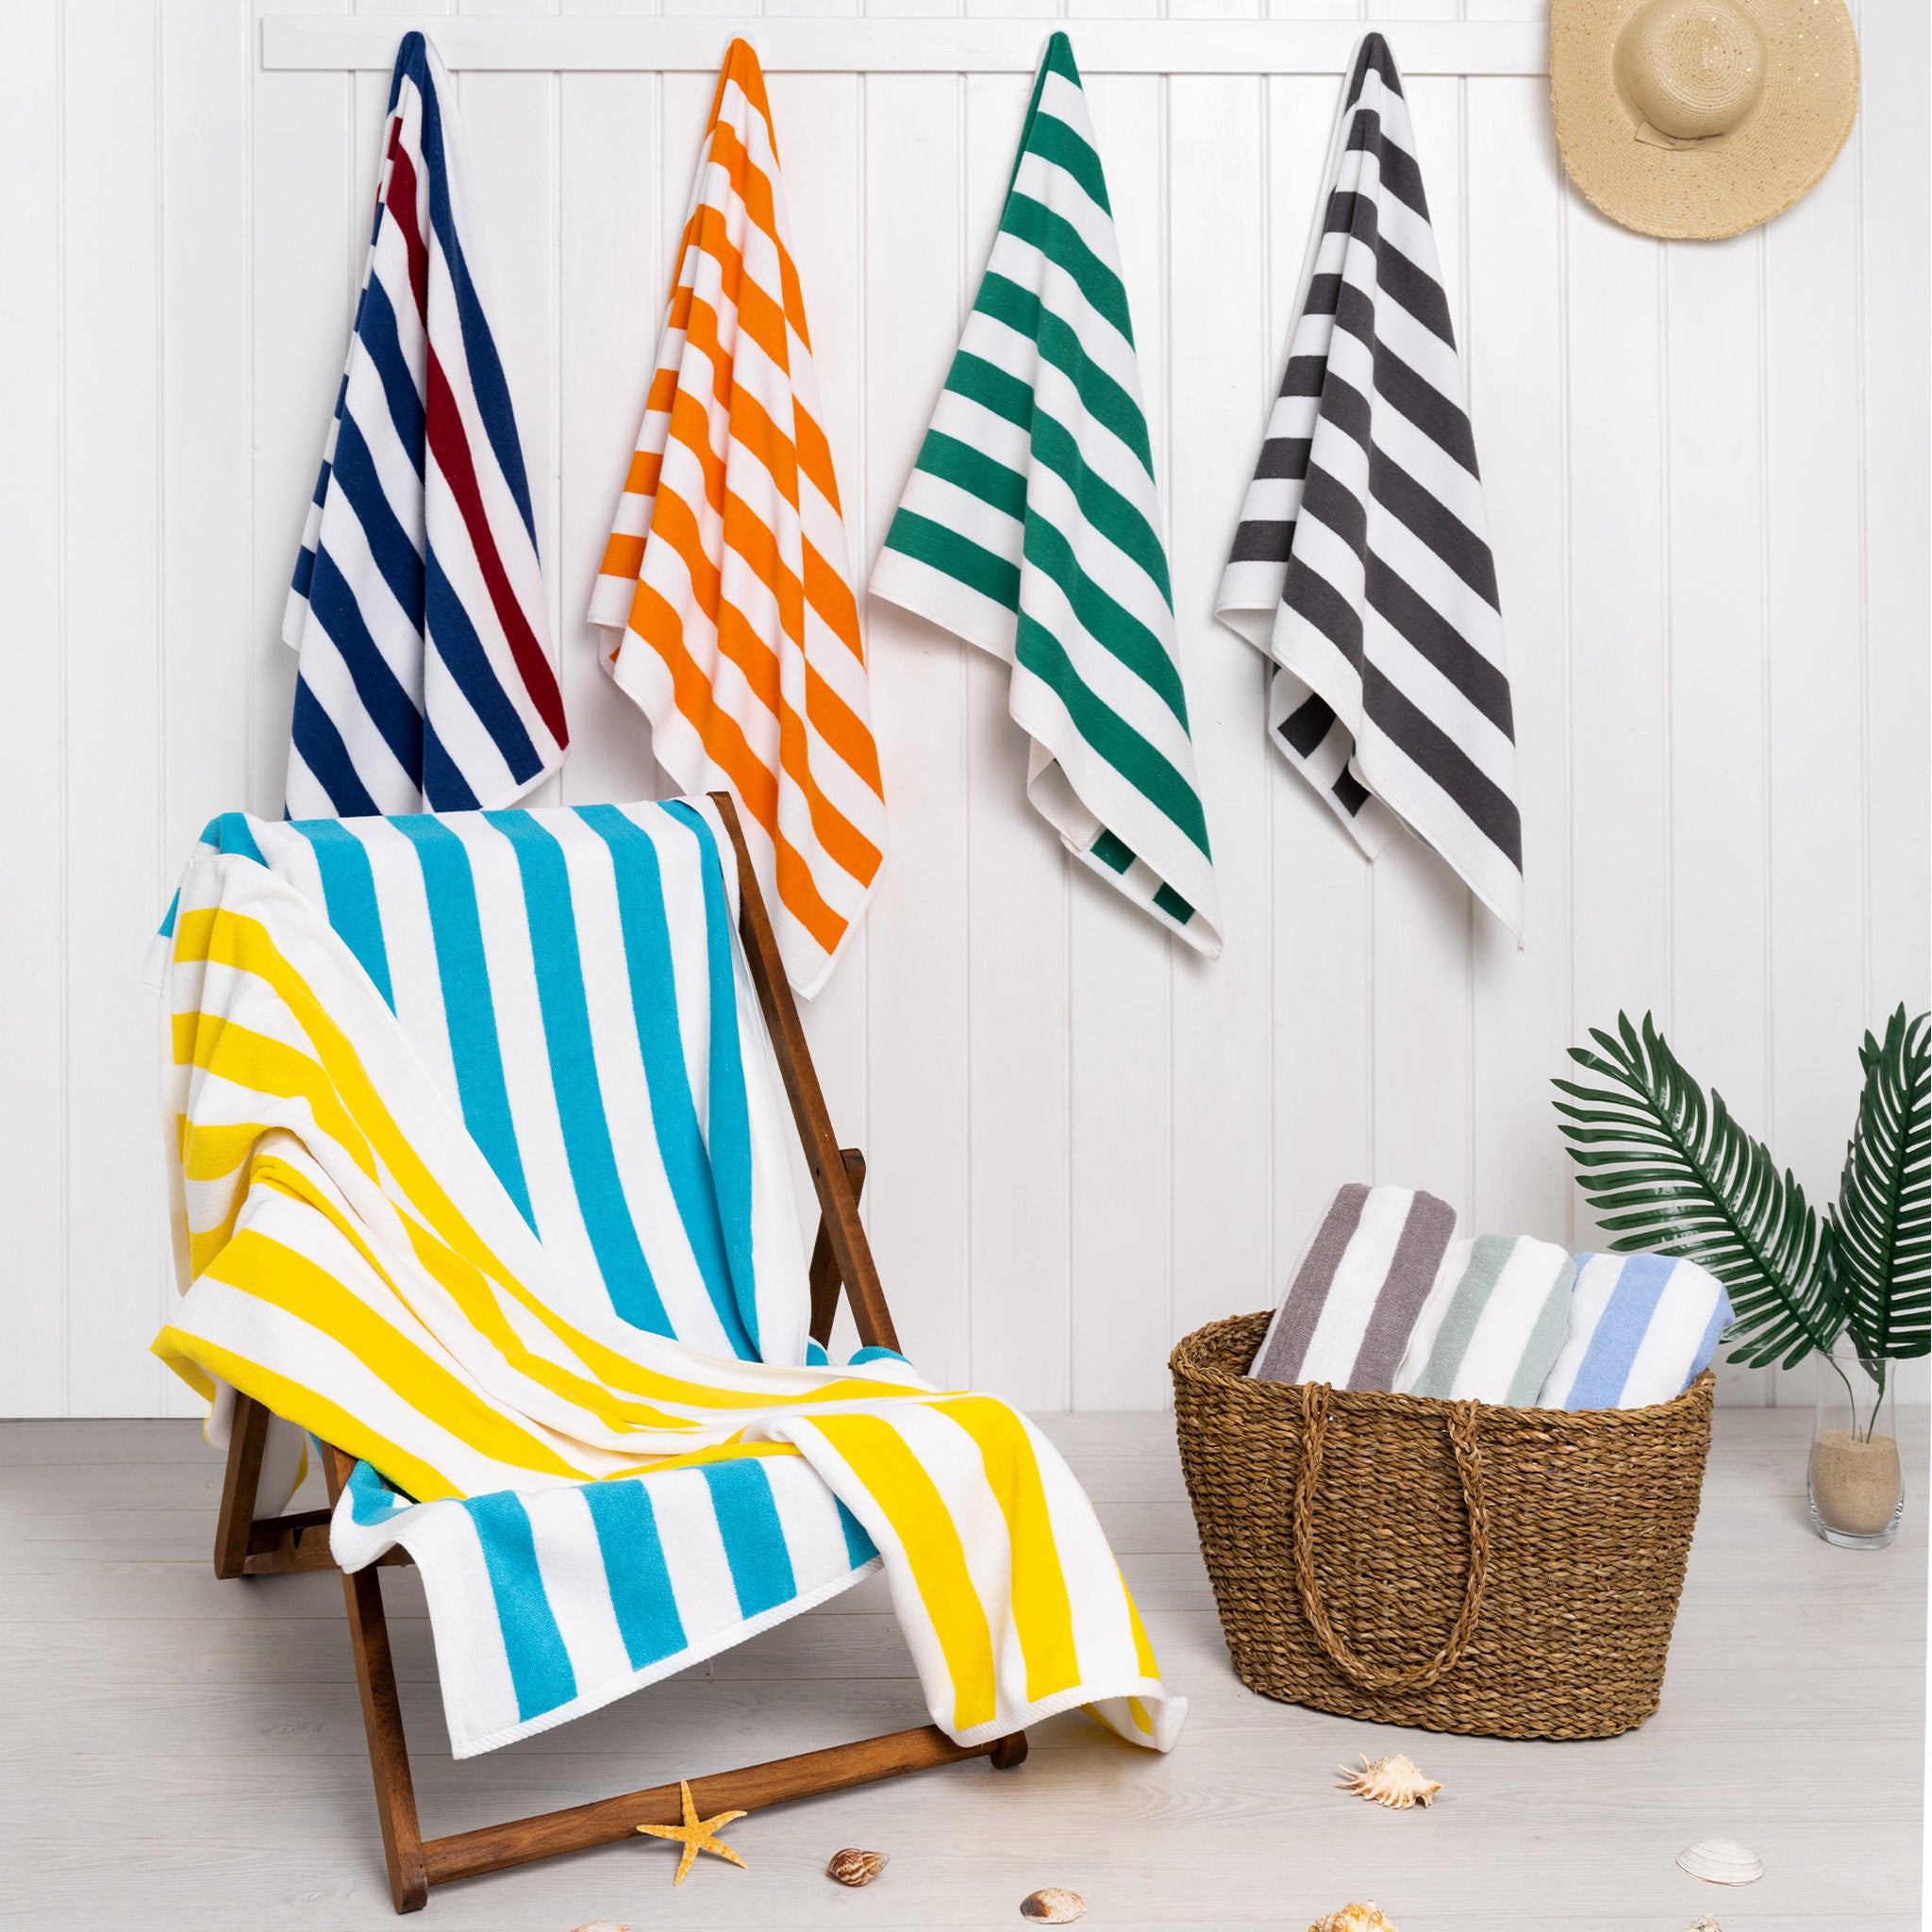 American Soft Linen 100% Cotton 4 Pack Beach Towels Cabana Striped Pool Towels -gray-8